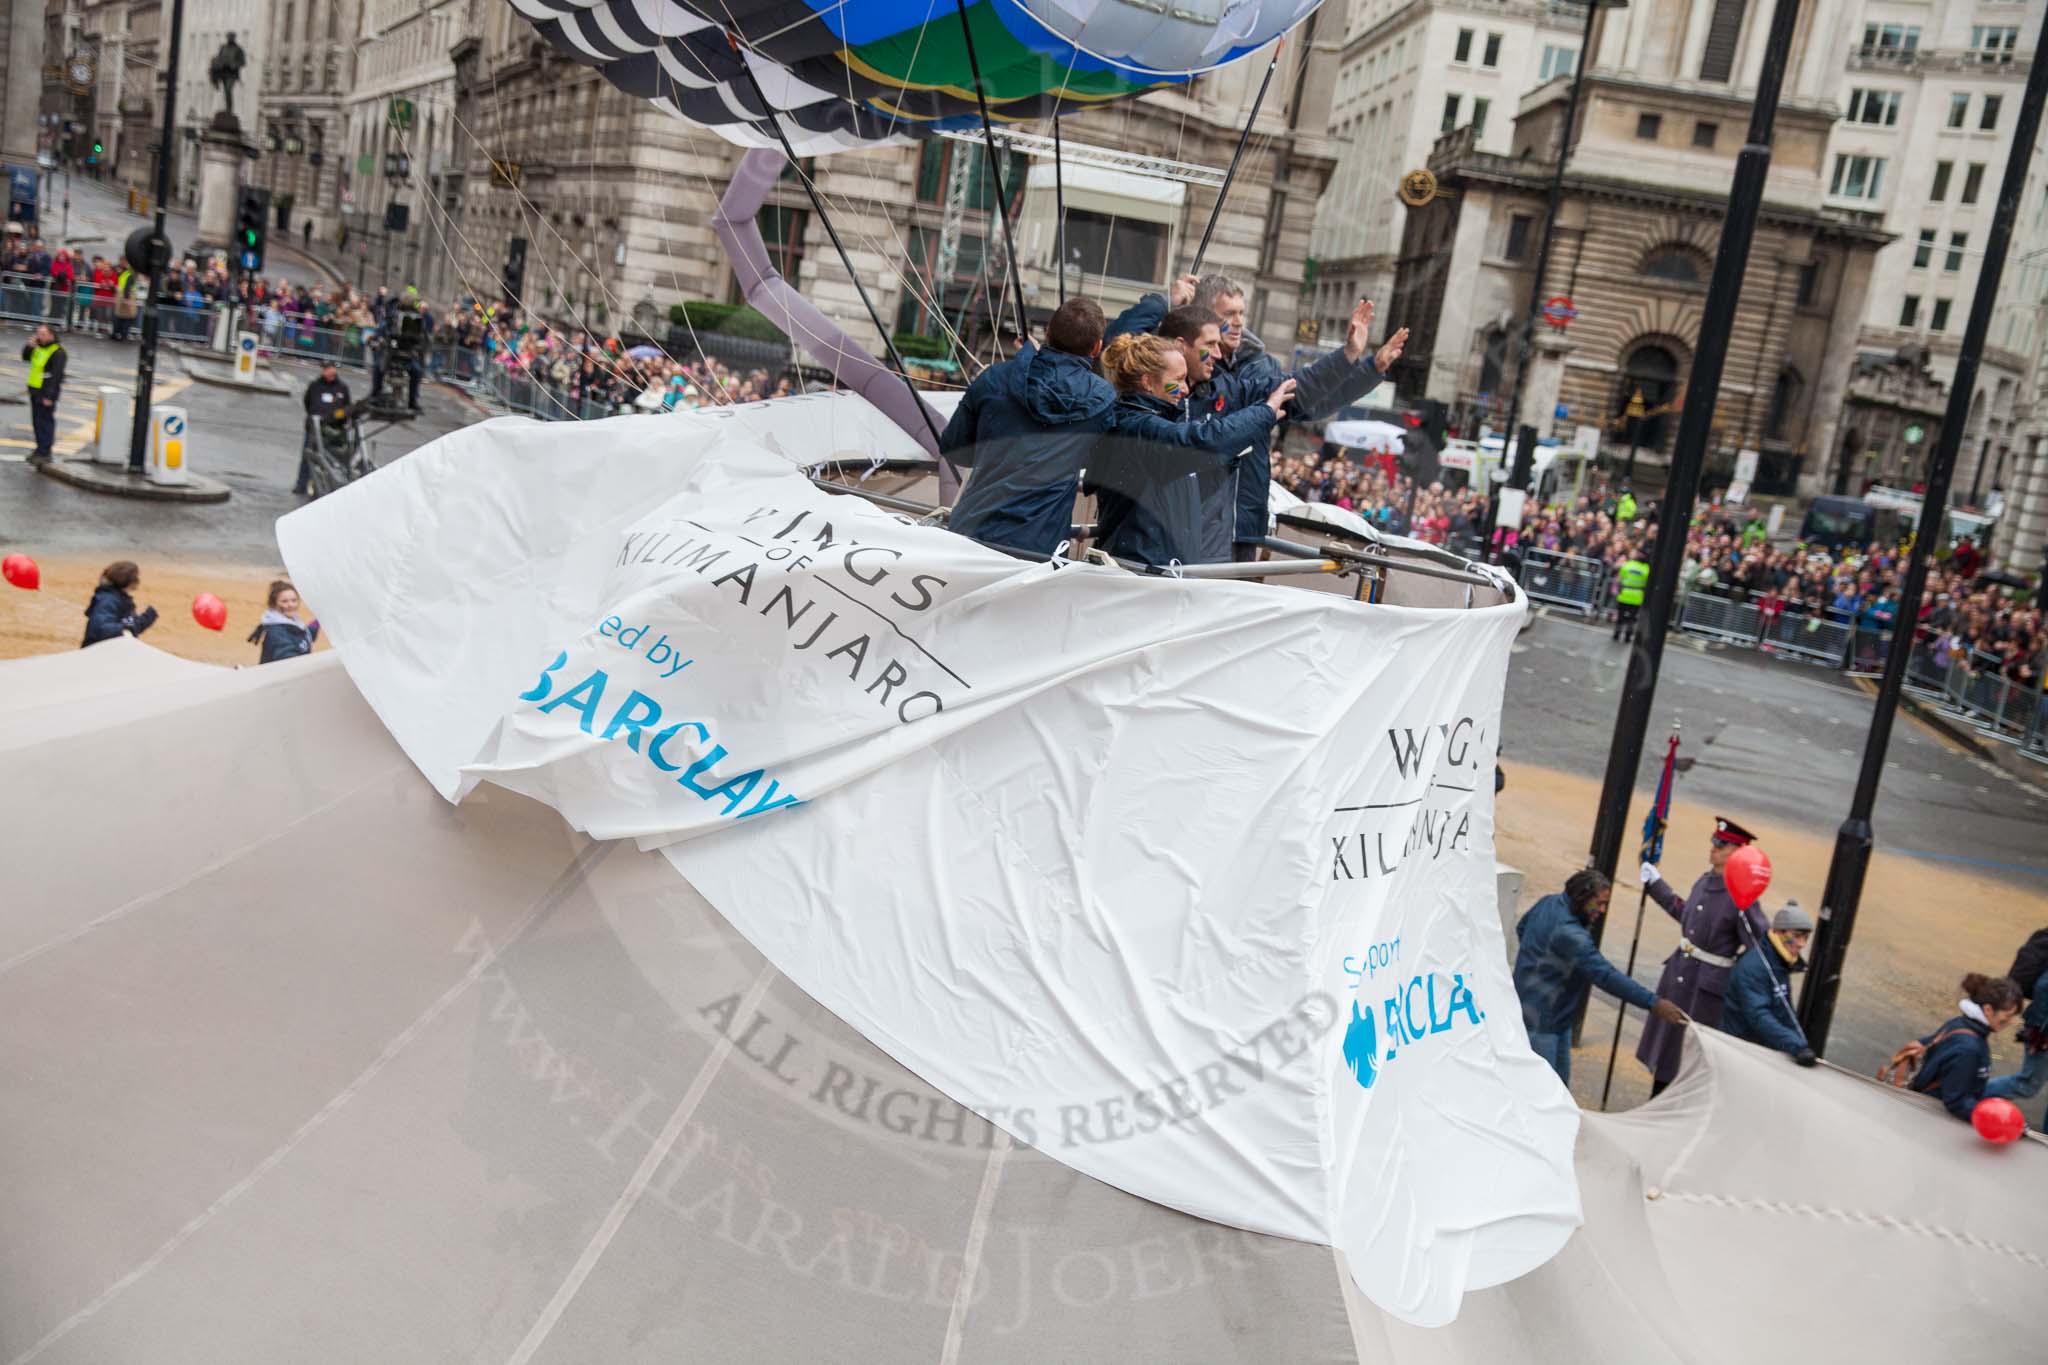 Lord Mayor's Show 2012: Entry 22 - Wings of Kilimanjaro - paraglider pi;ots about to fly from Mt Kilimanjaro for charity..
Press stand opposite Mansion House, City of London,
London,
Greater London,
United Kingdom,
on 10 November 2012 at 11:10, image #385